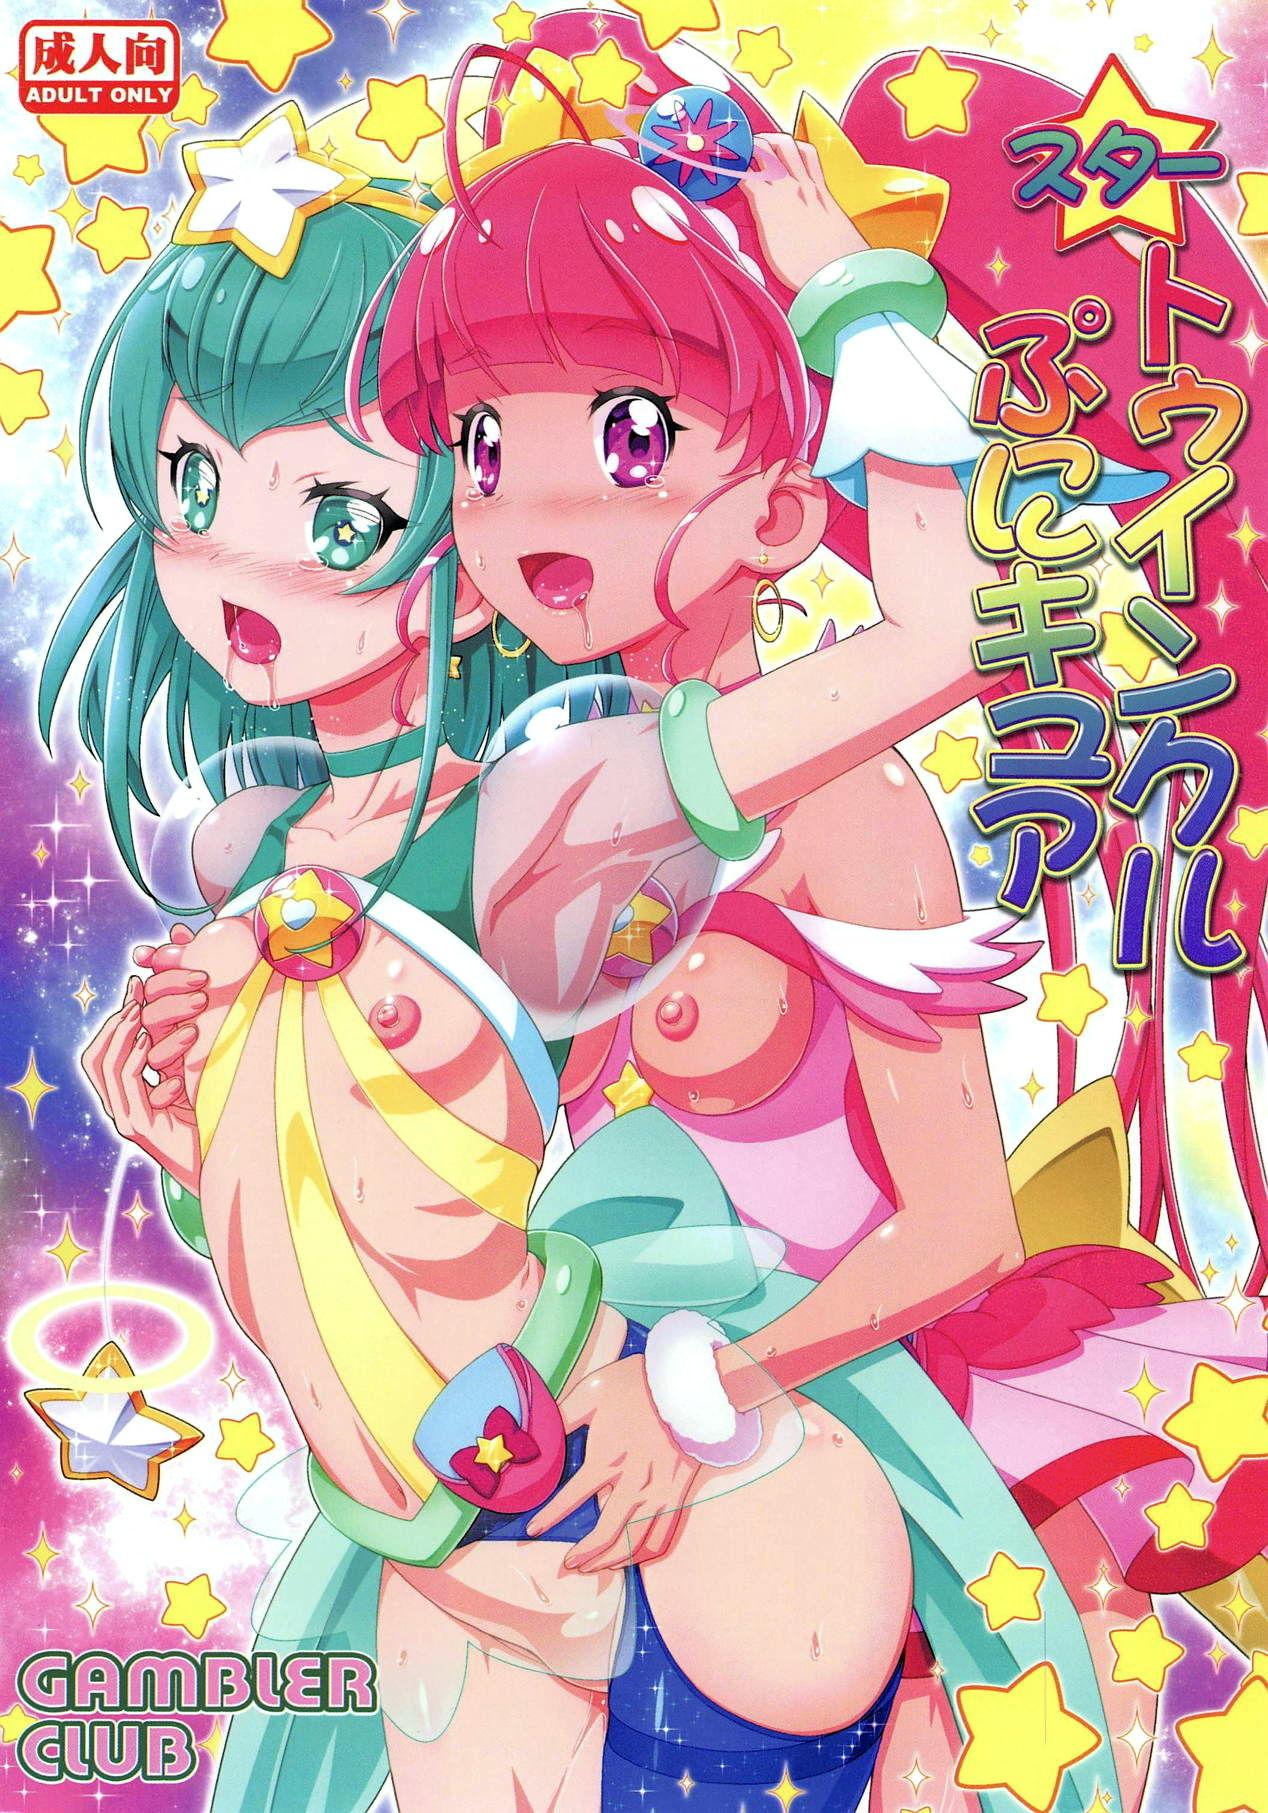 French Porn Star Twinkle PuniCure - Star twinkle precure Pasivo - Page 1